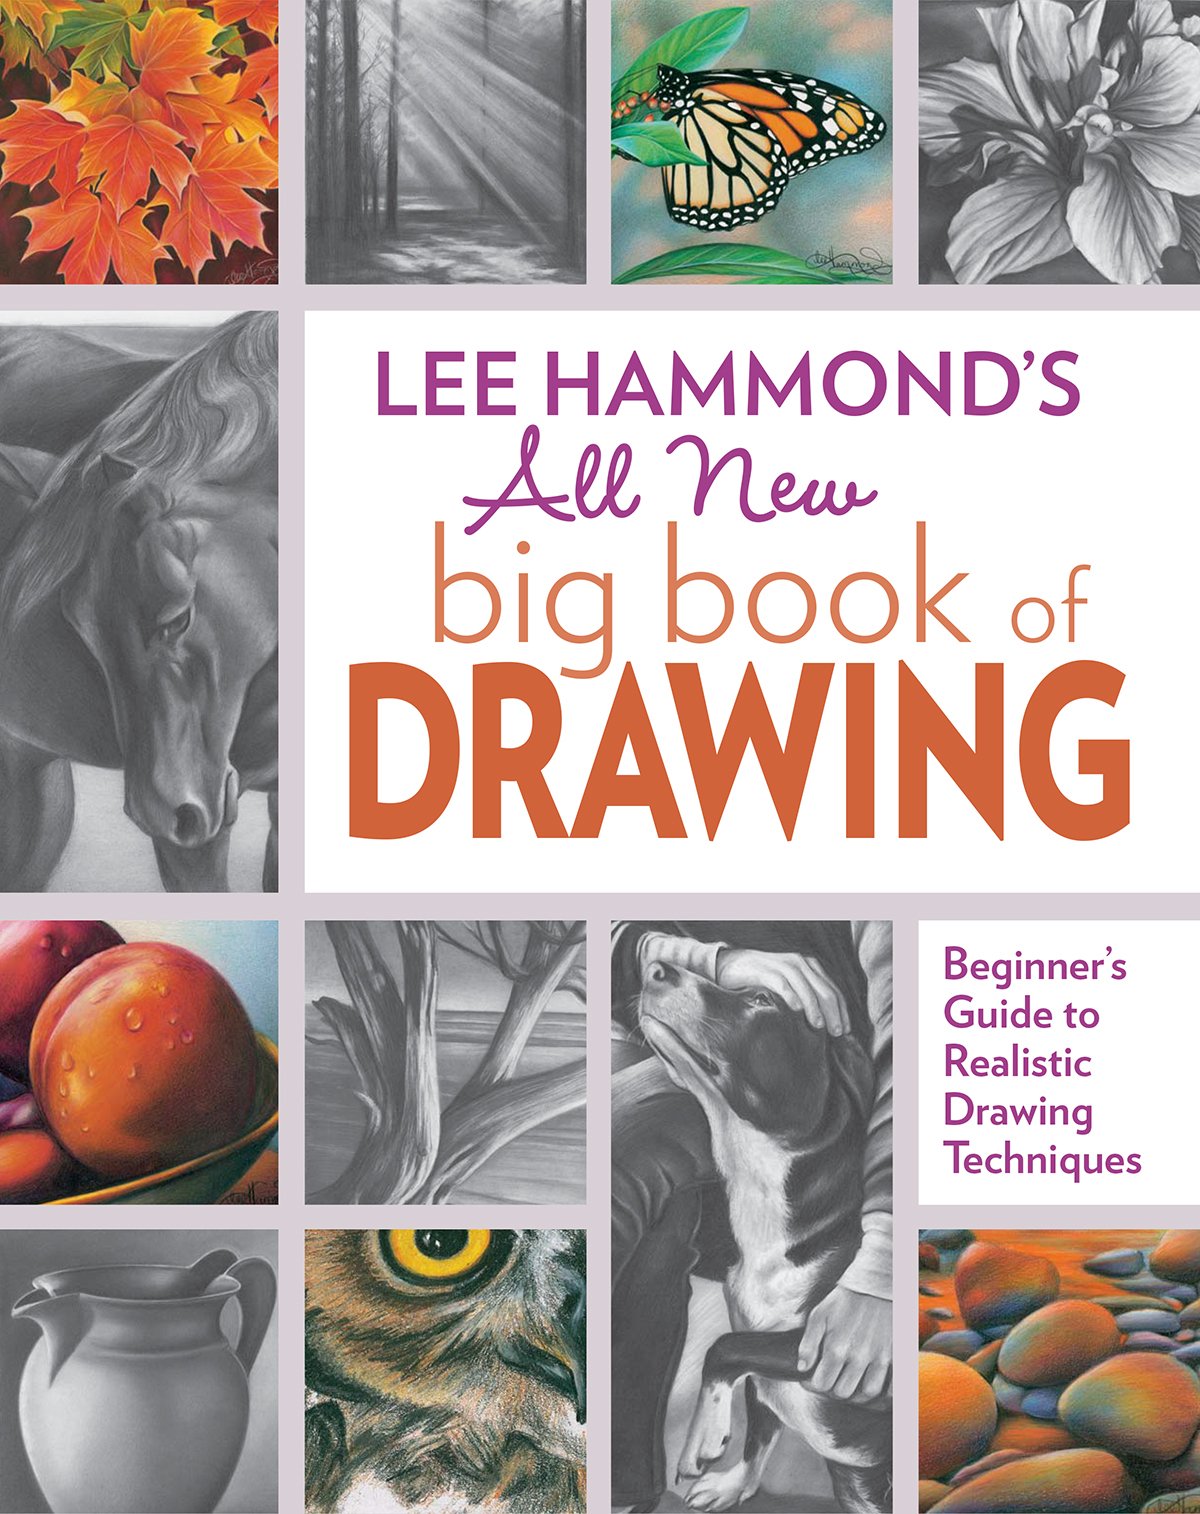 Great drawing books for artists and beginners alike that you mustn't miss